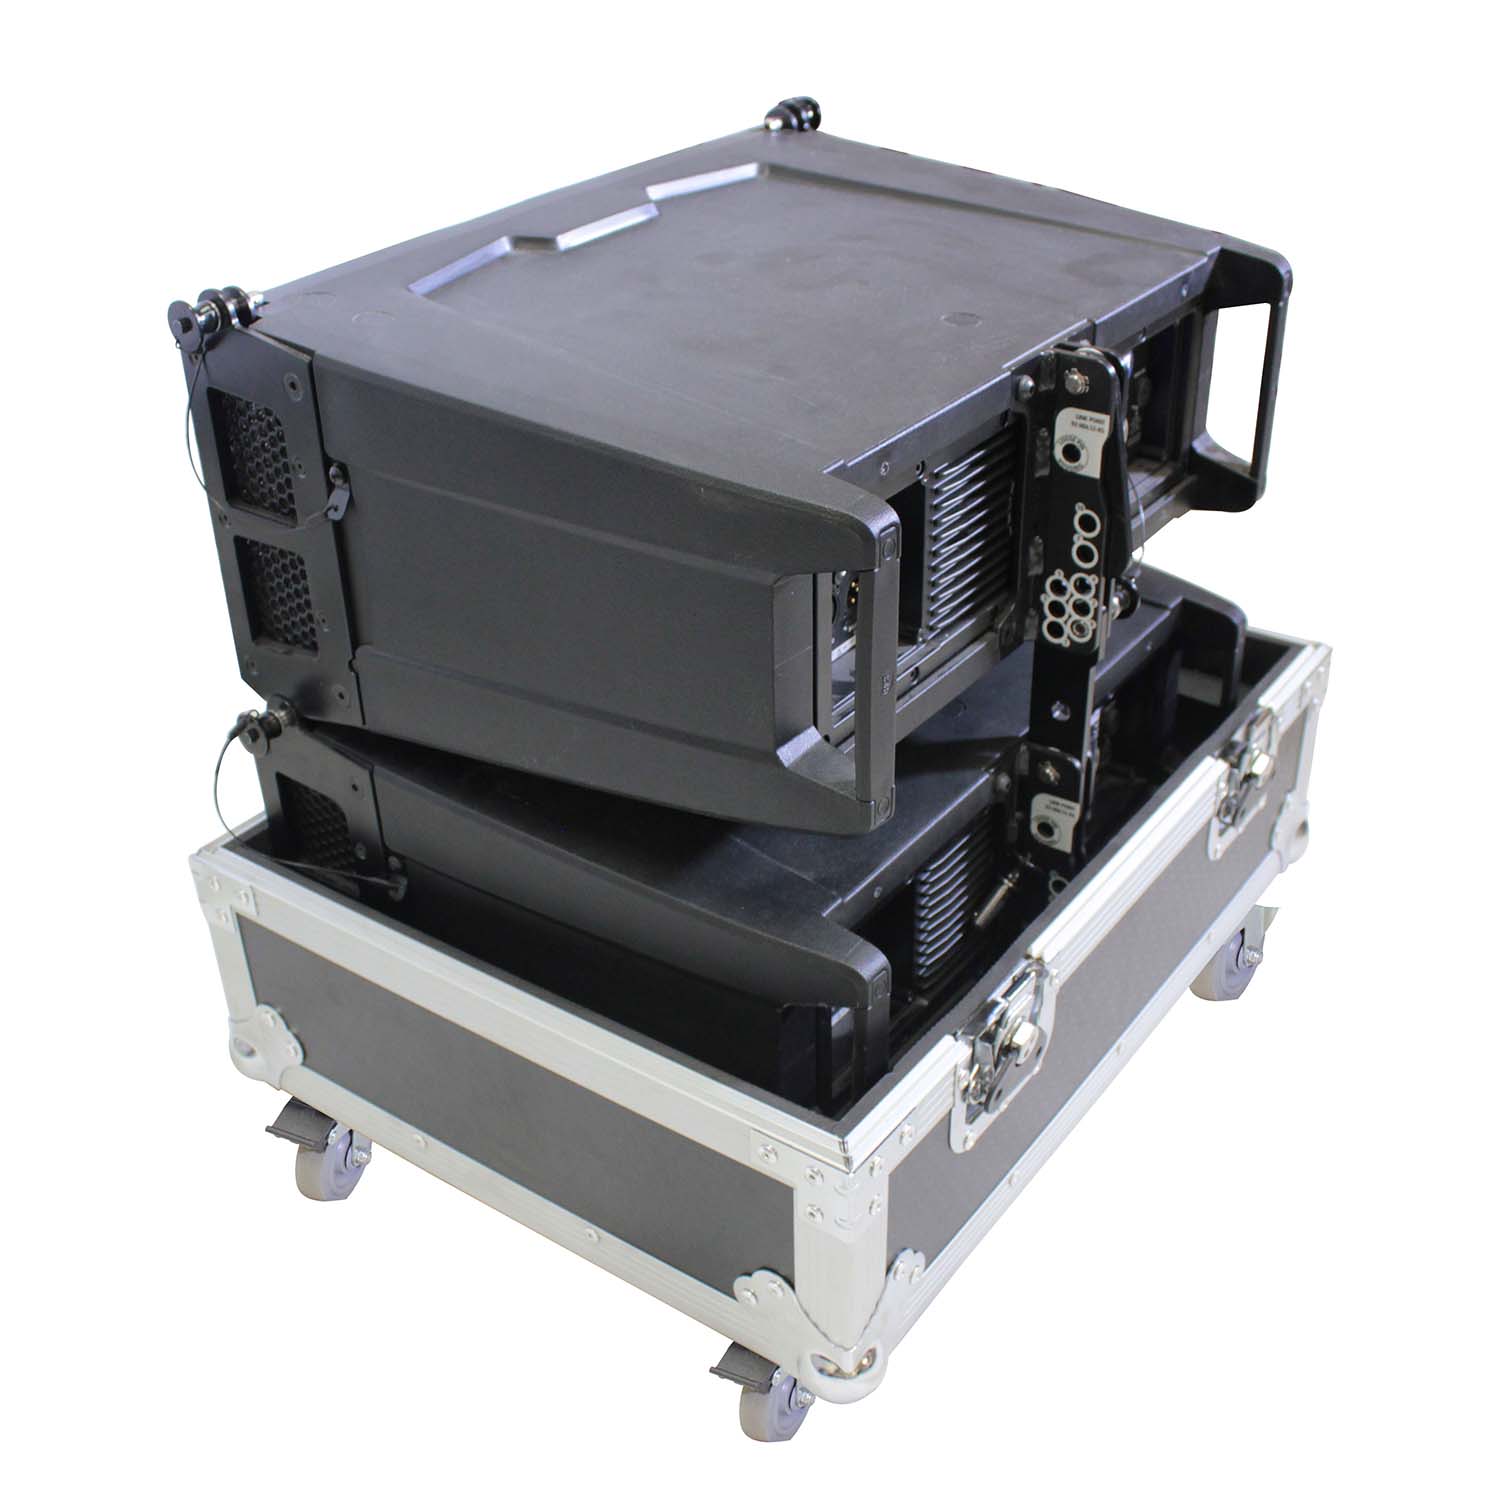 B-Stock: ProX X-RCF-HDL6ALAX2W, Line Array Flight Case for 2 RCF HDL6-A HDL26-A Speakers with Wheels ProX Cases